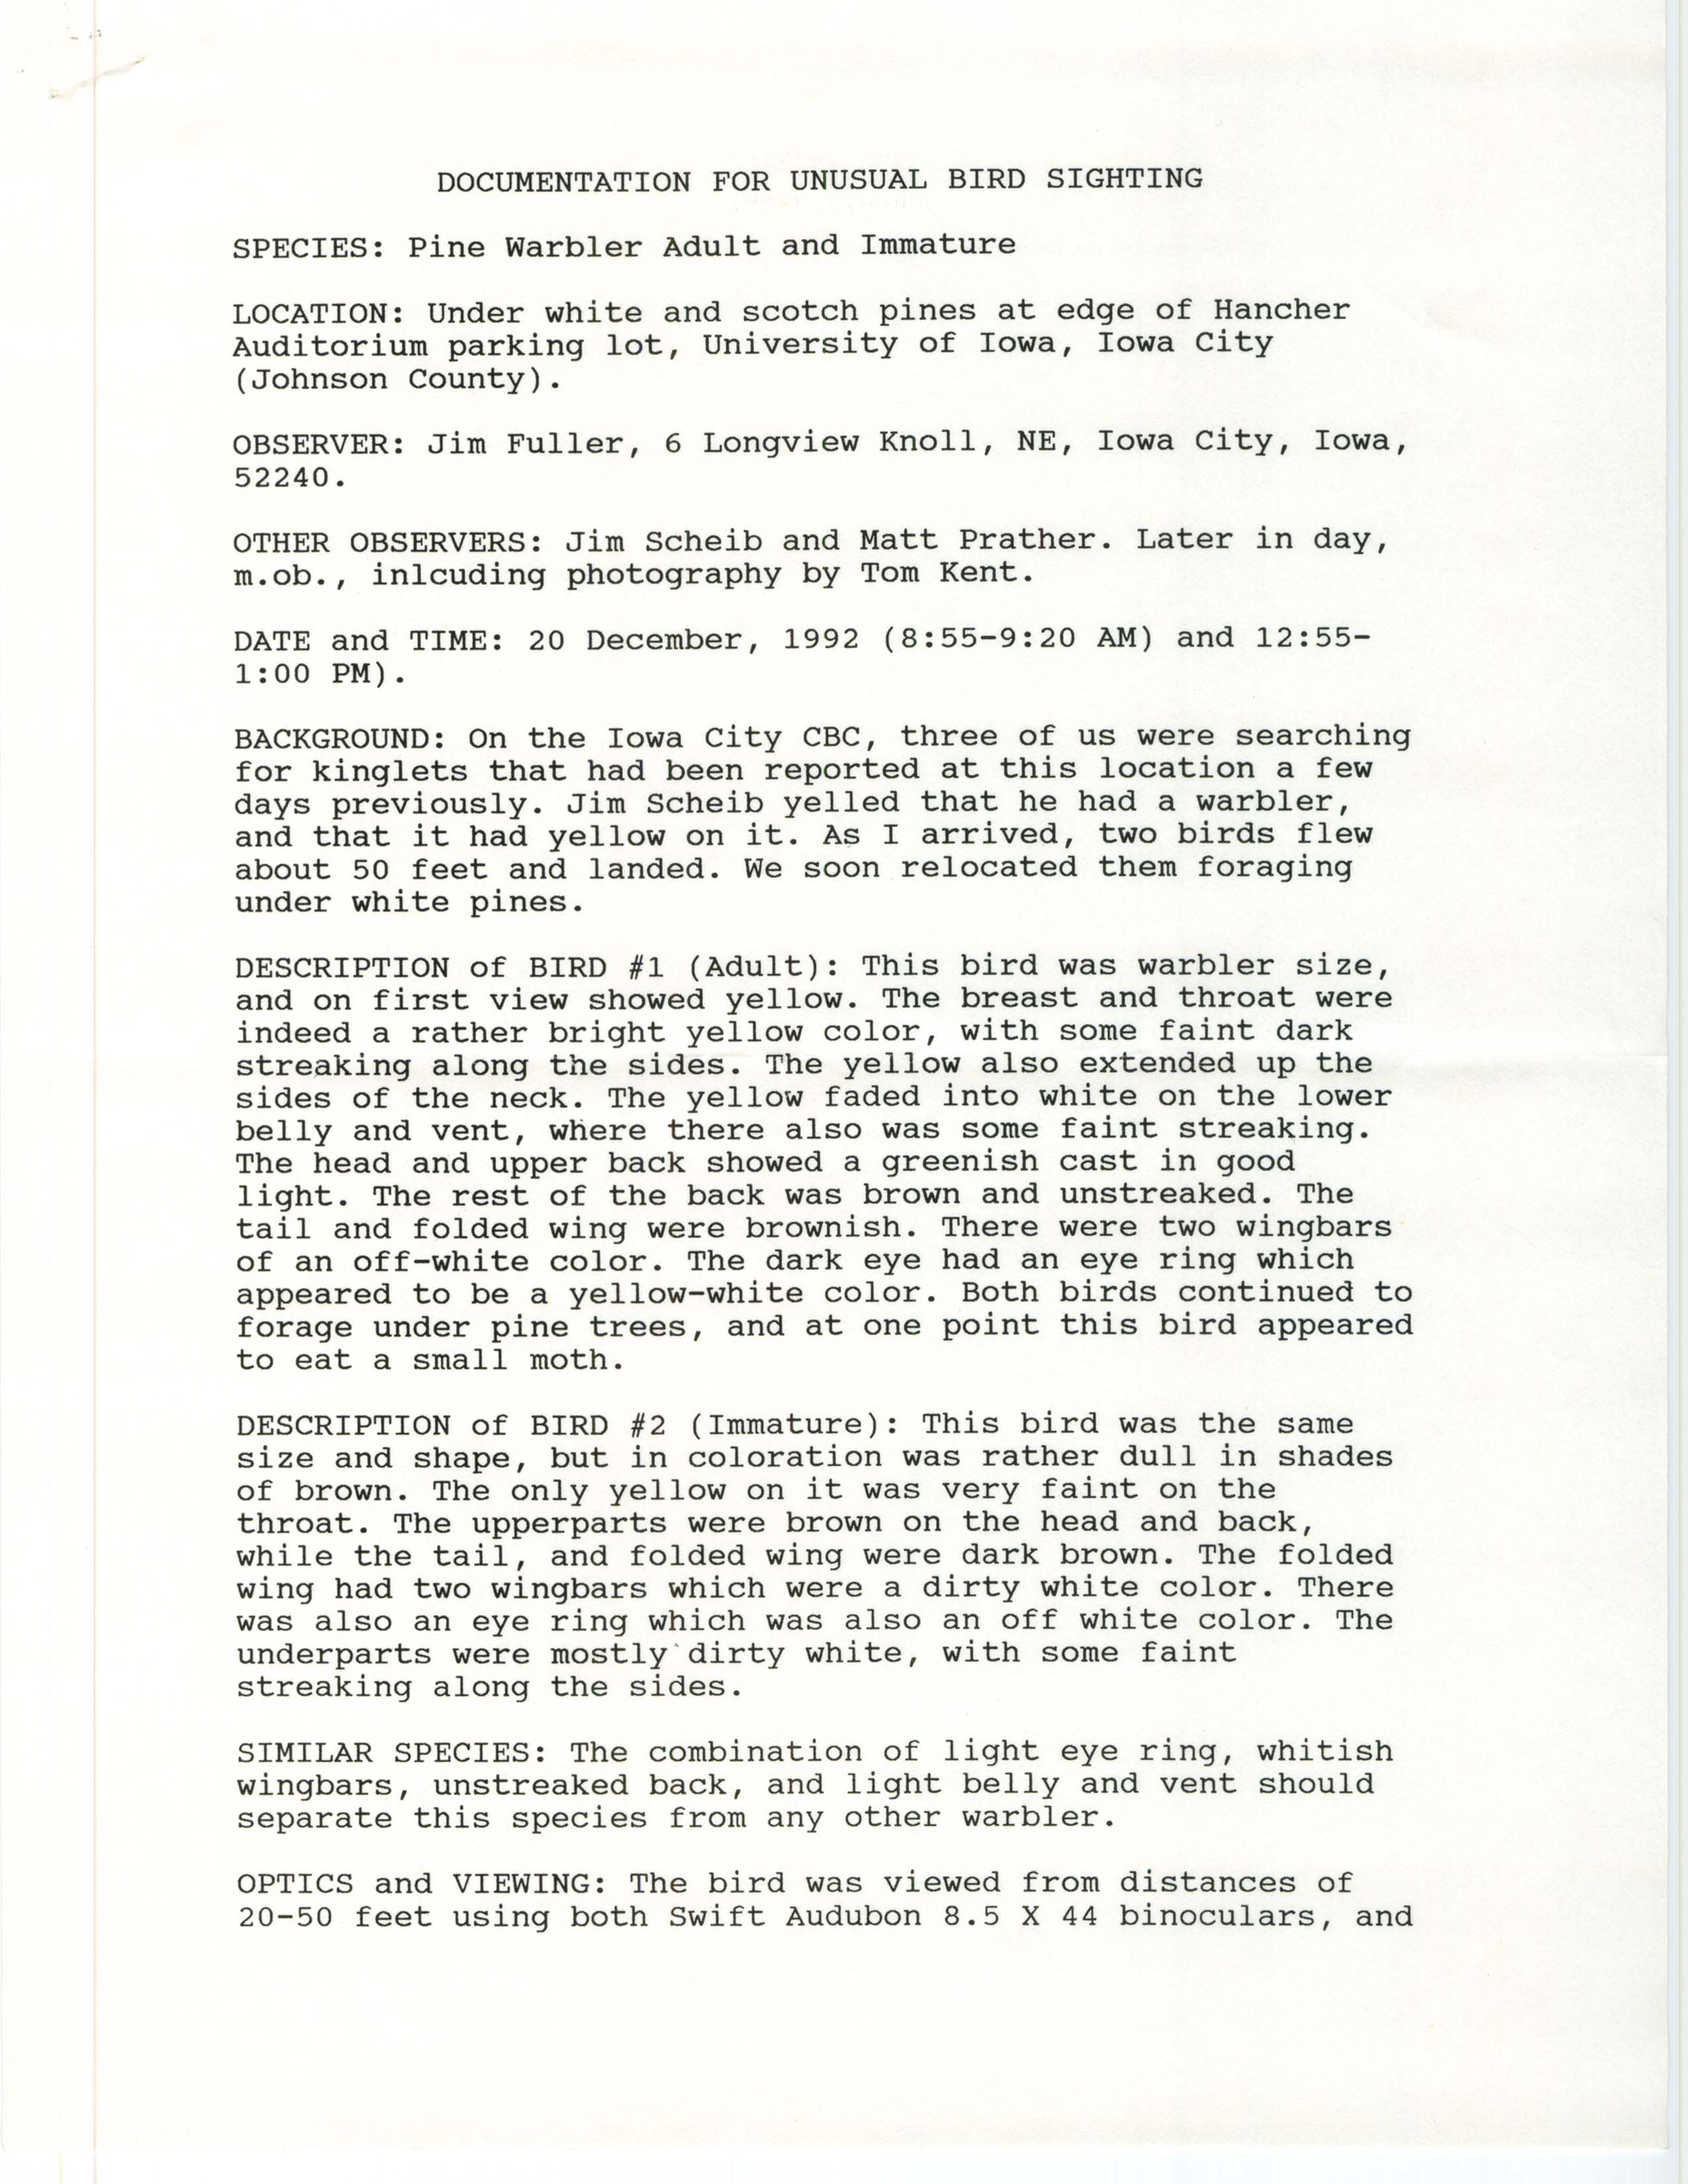 Rare bird documentation form for Pine Warbler at Hancher Auditorium at the University of Iowa, 1992